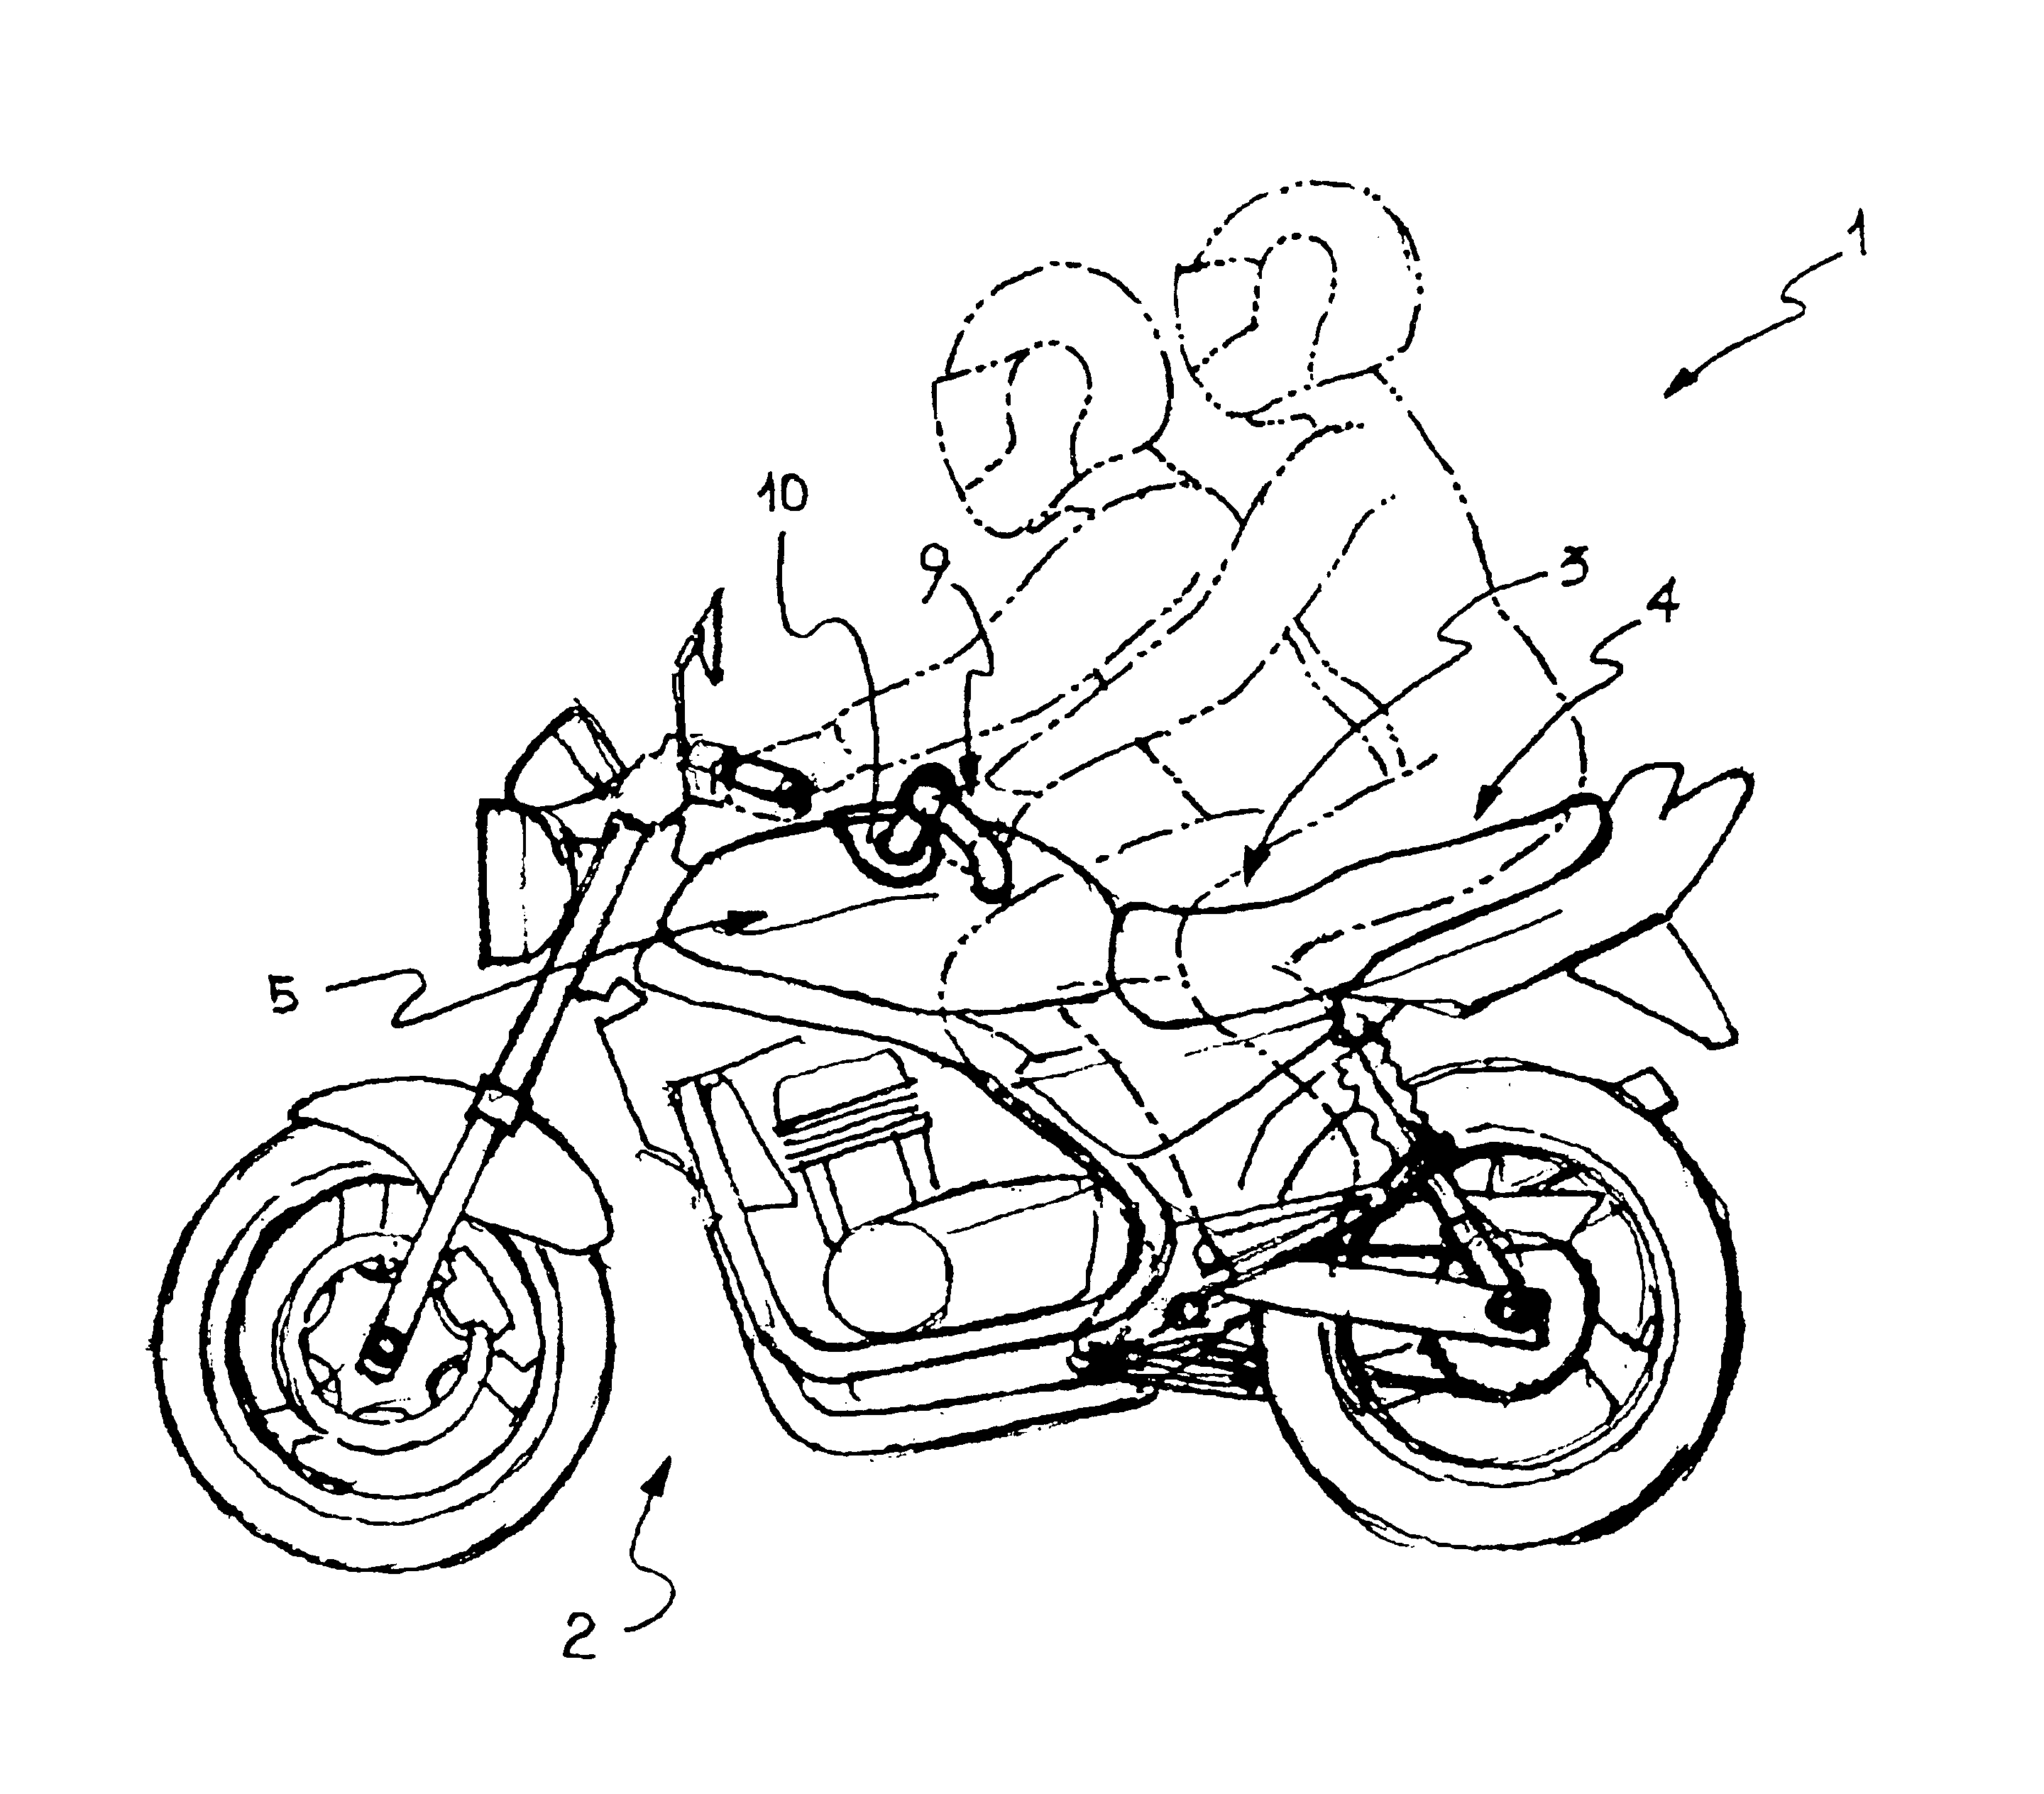 Motorcycle with handgrip for the passenger